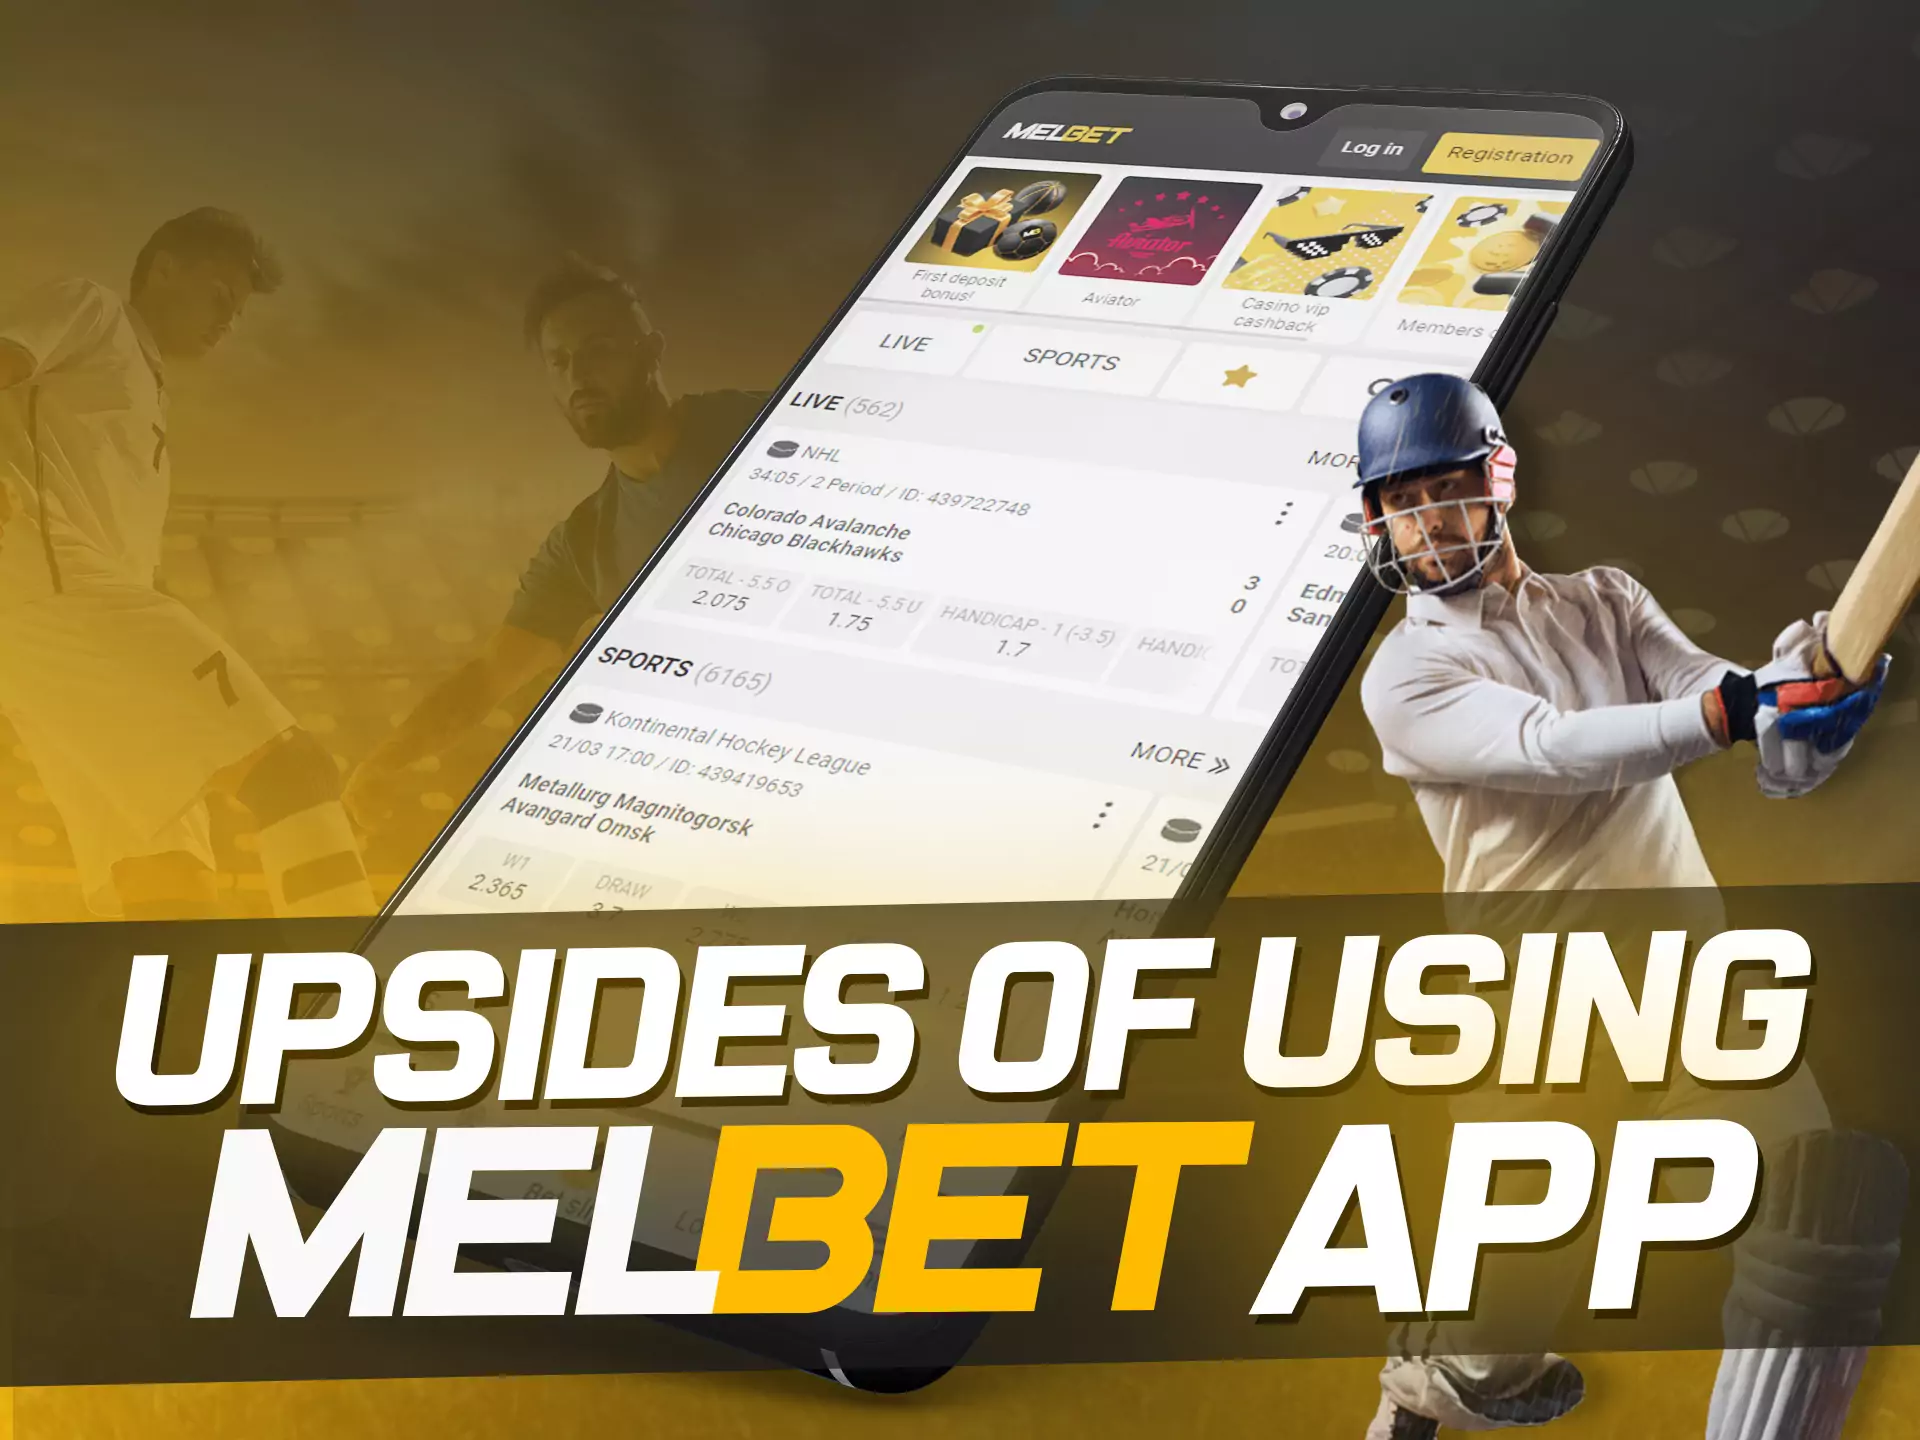 Learn about the advantages of using Melbet app.